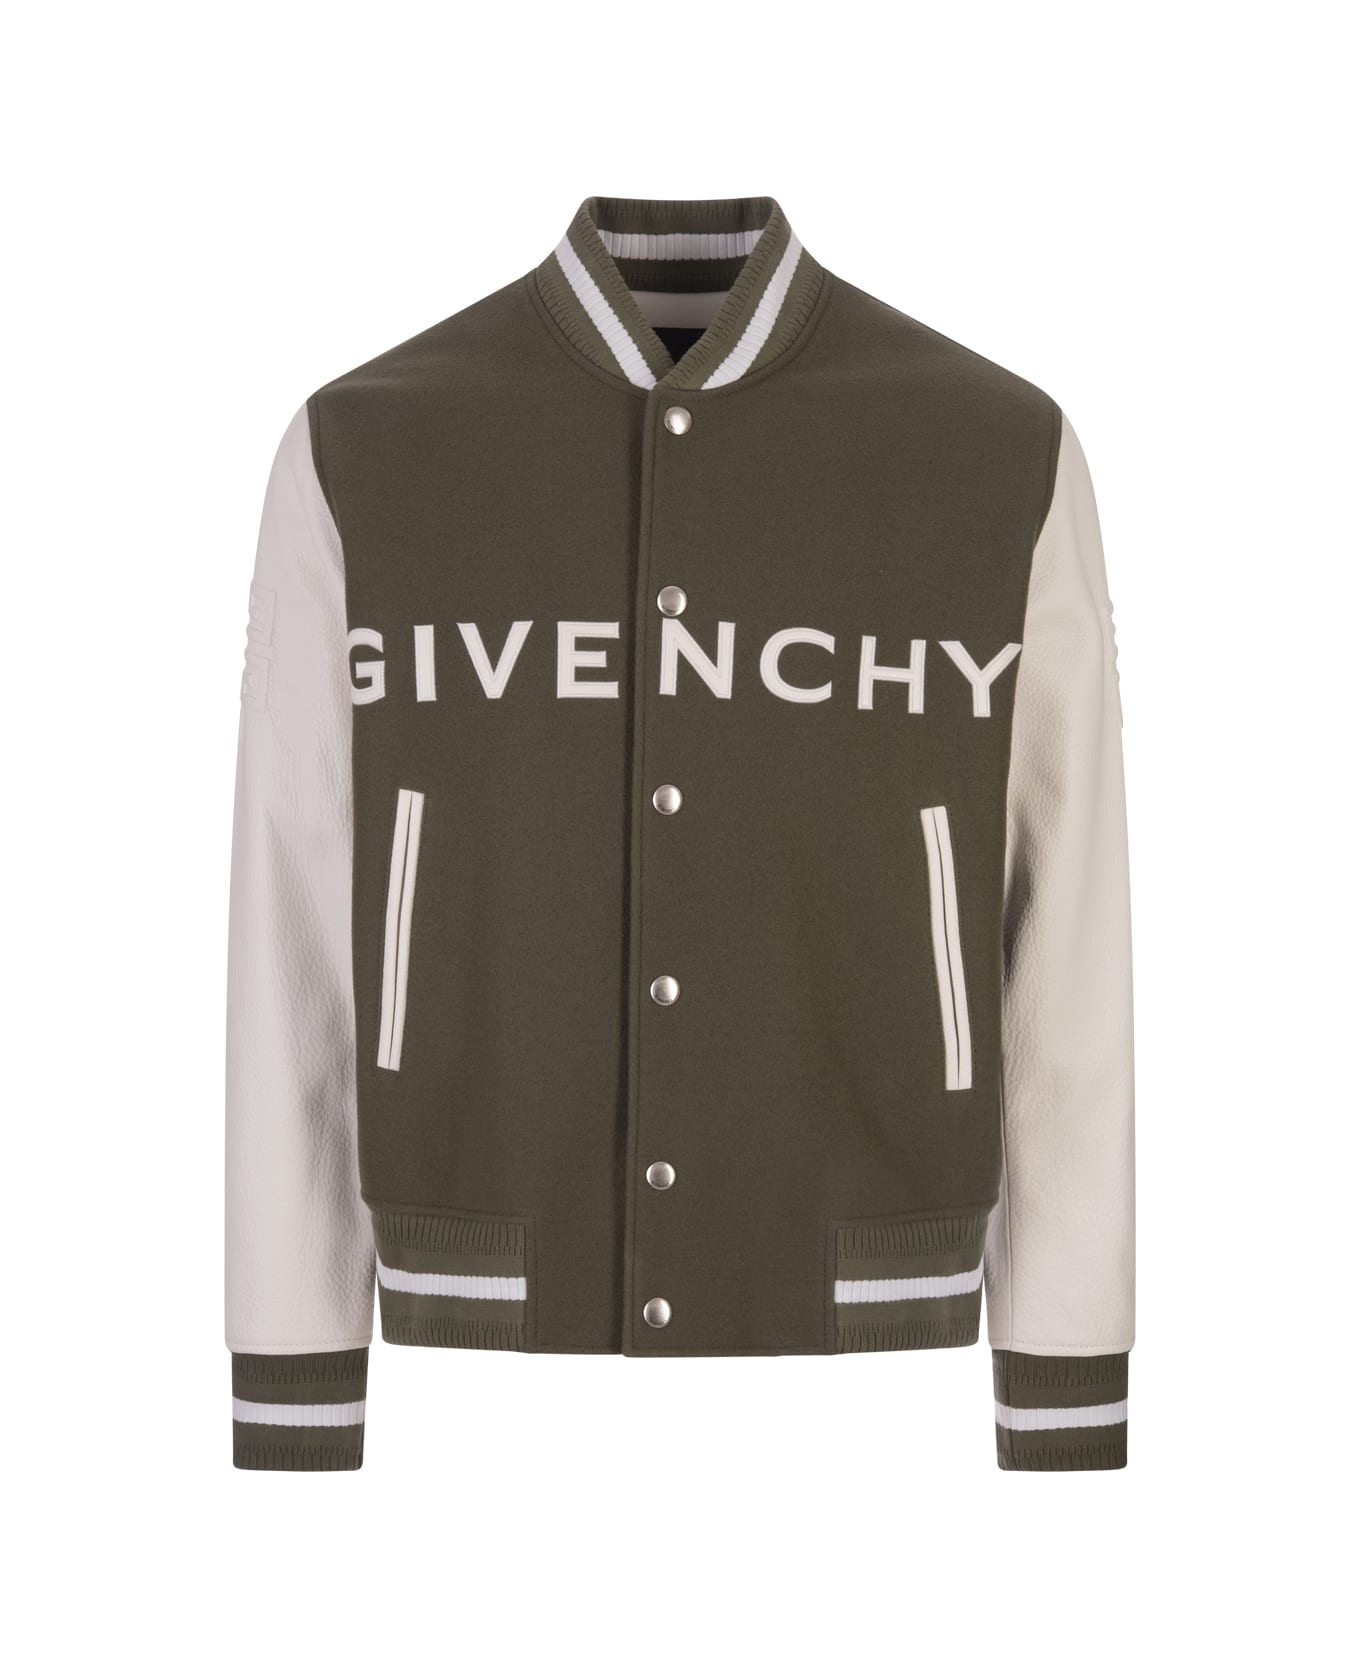 Givenchy Khaki And White Givenchy Bomber Jacket In Wool And Leather - Green